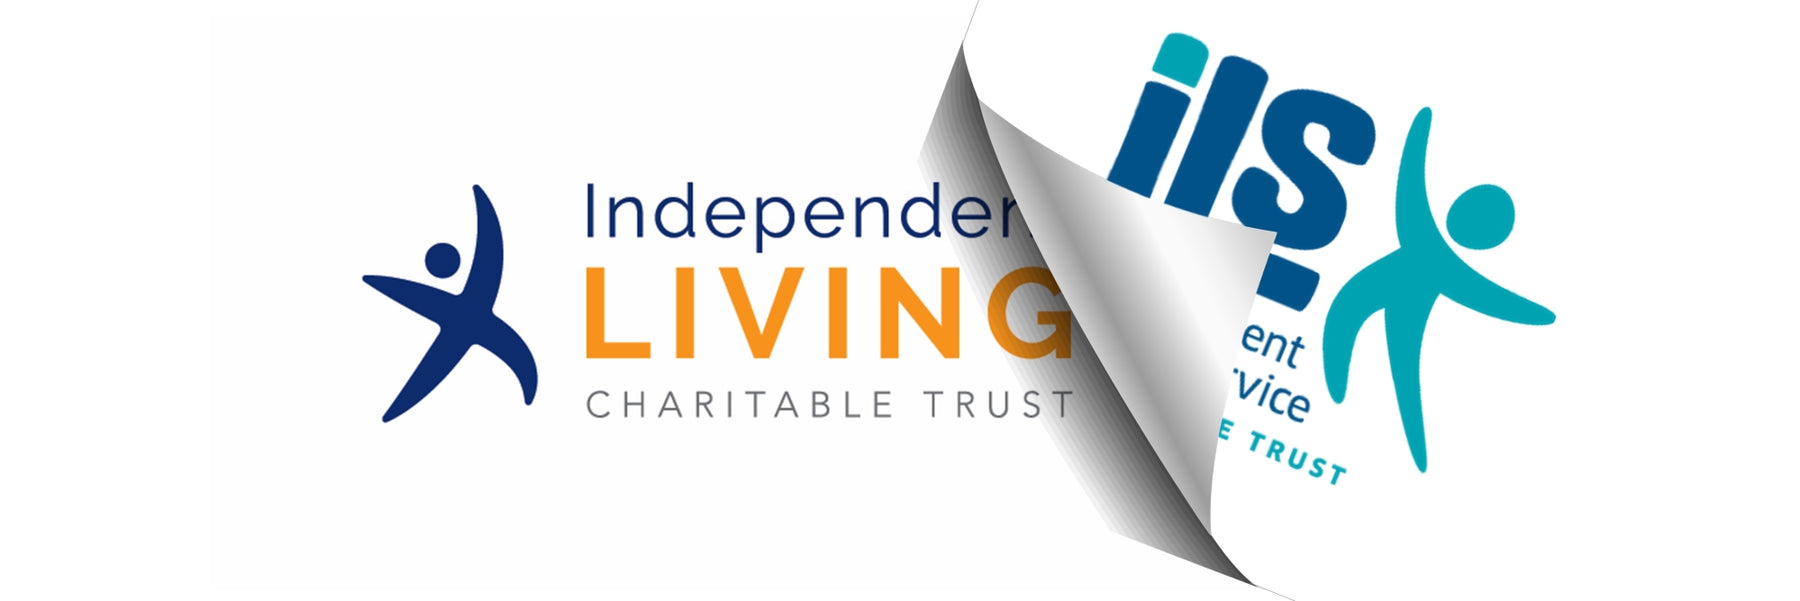 New independent living logo next to the old logo